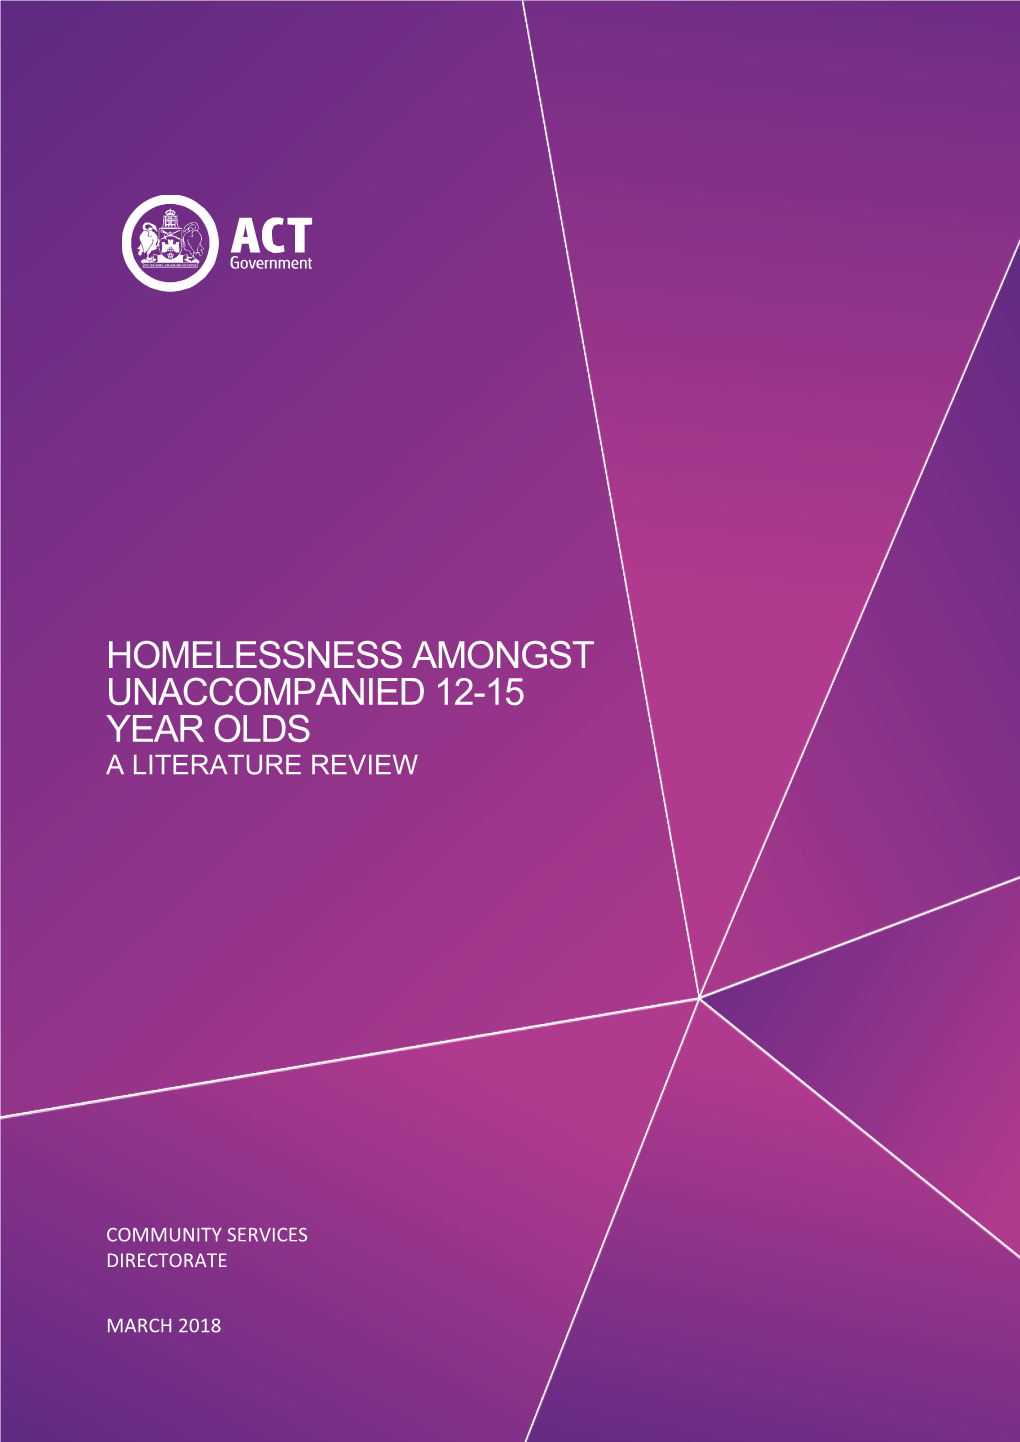 Homelessness Amongst Unaccompanied 12-15 Year Olds: a Literature Review